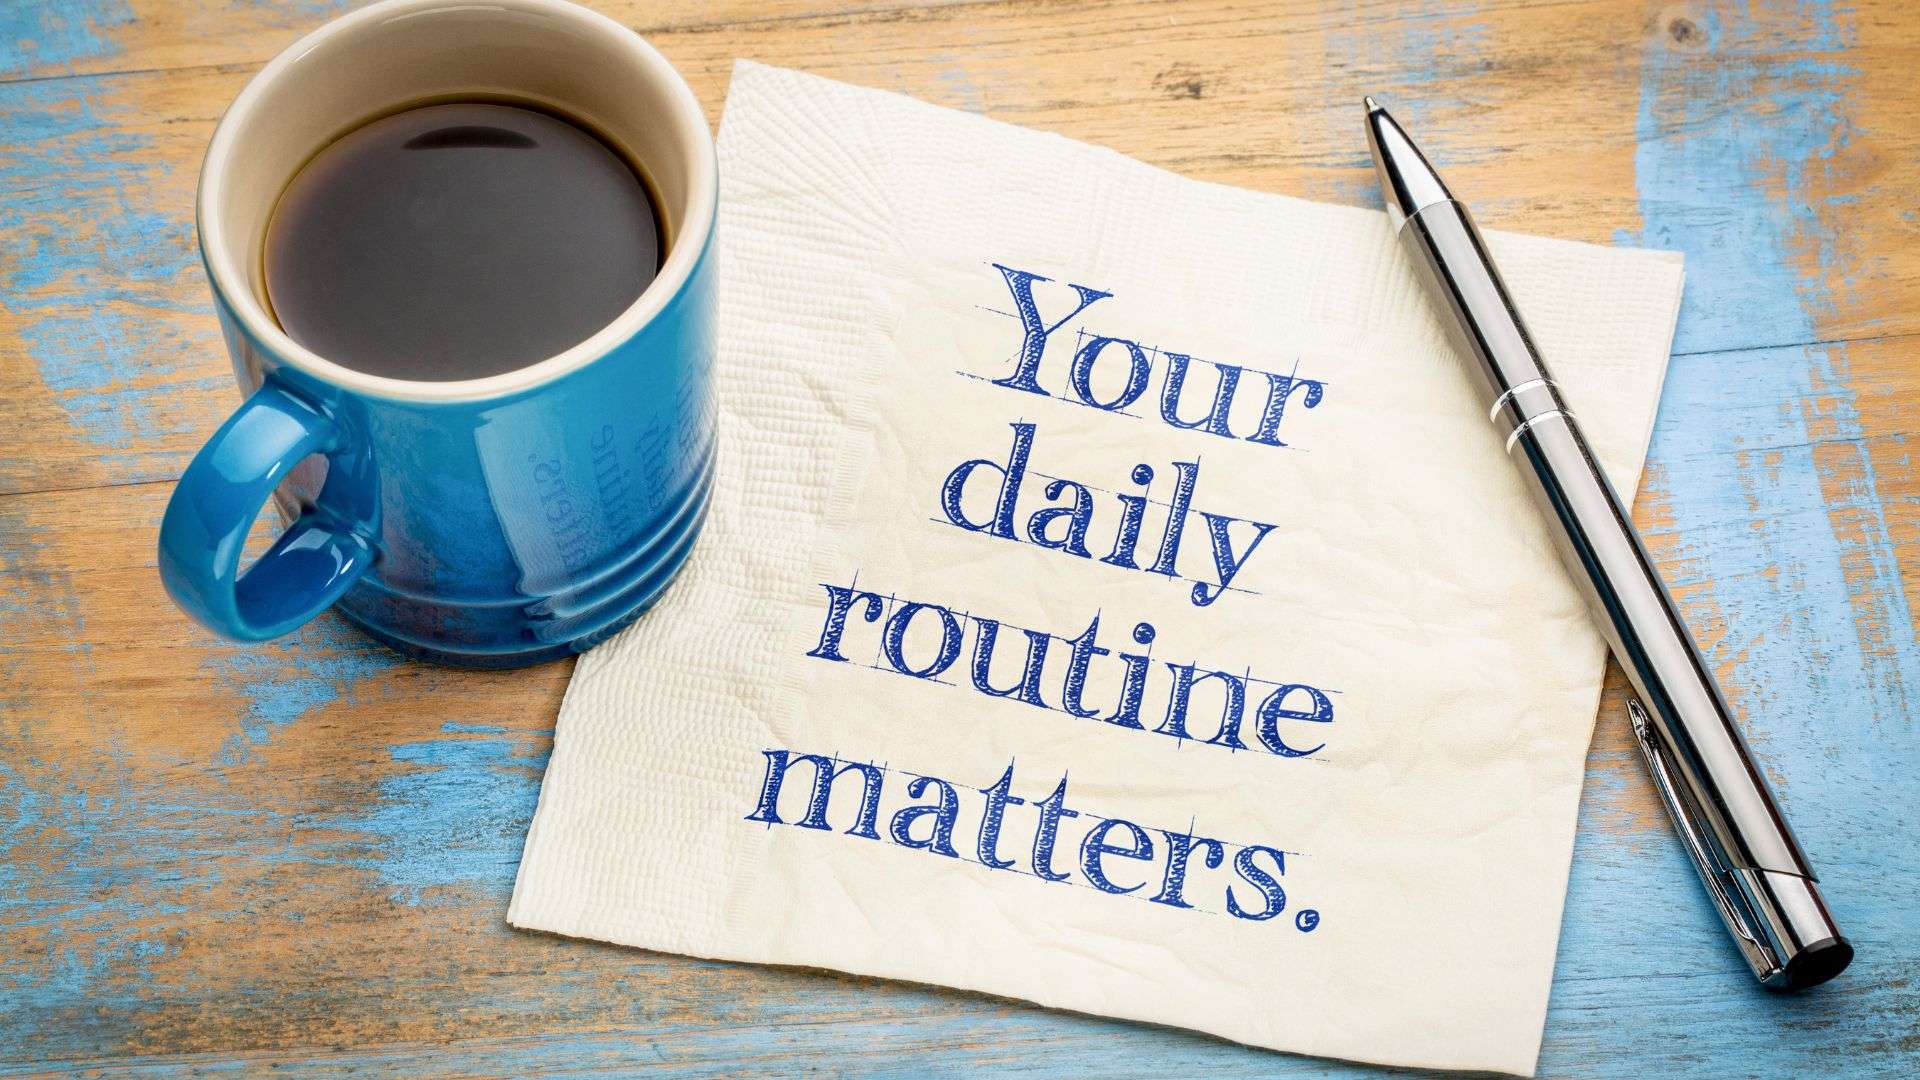 A wooden desk with a mug of coffee and pen resting on a note that reads "Your daily routine matters."